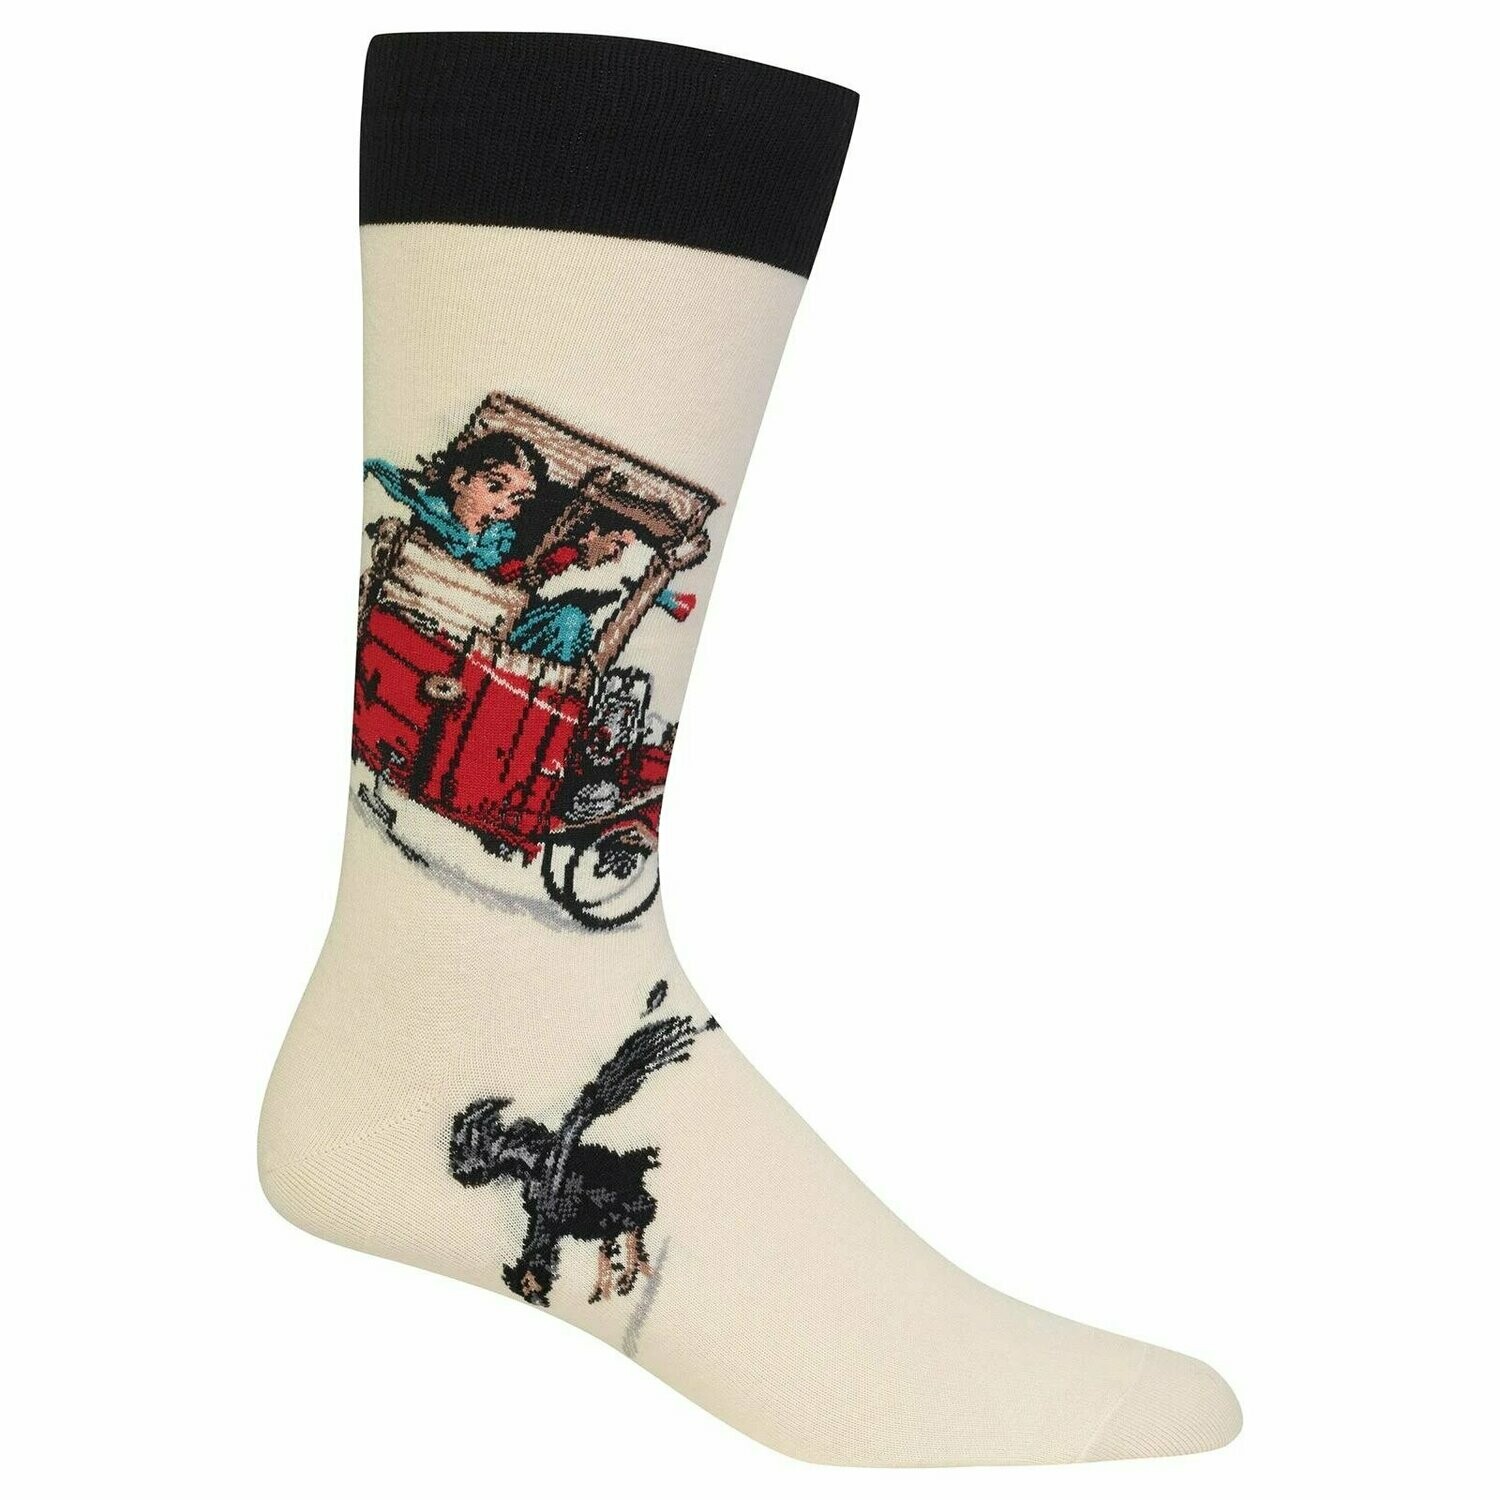 Norman Rockwell Saturday Evening Post Collection Soap Box Racer Crew Socks